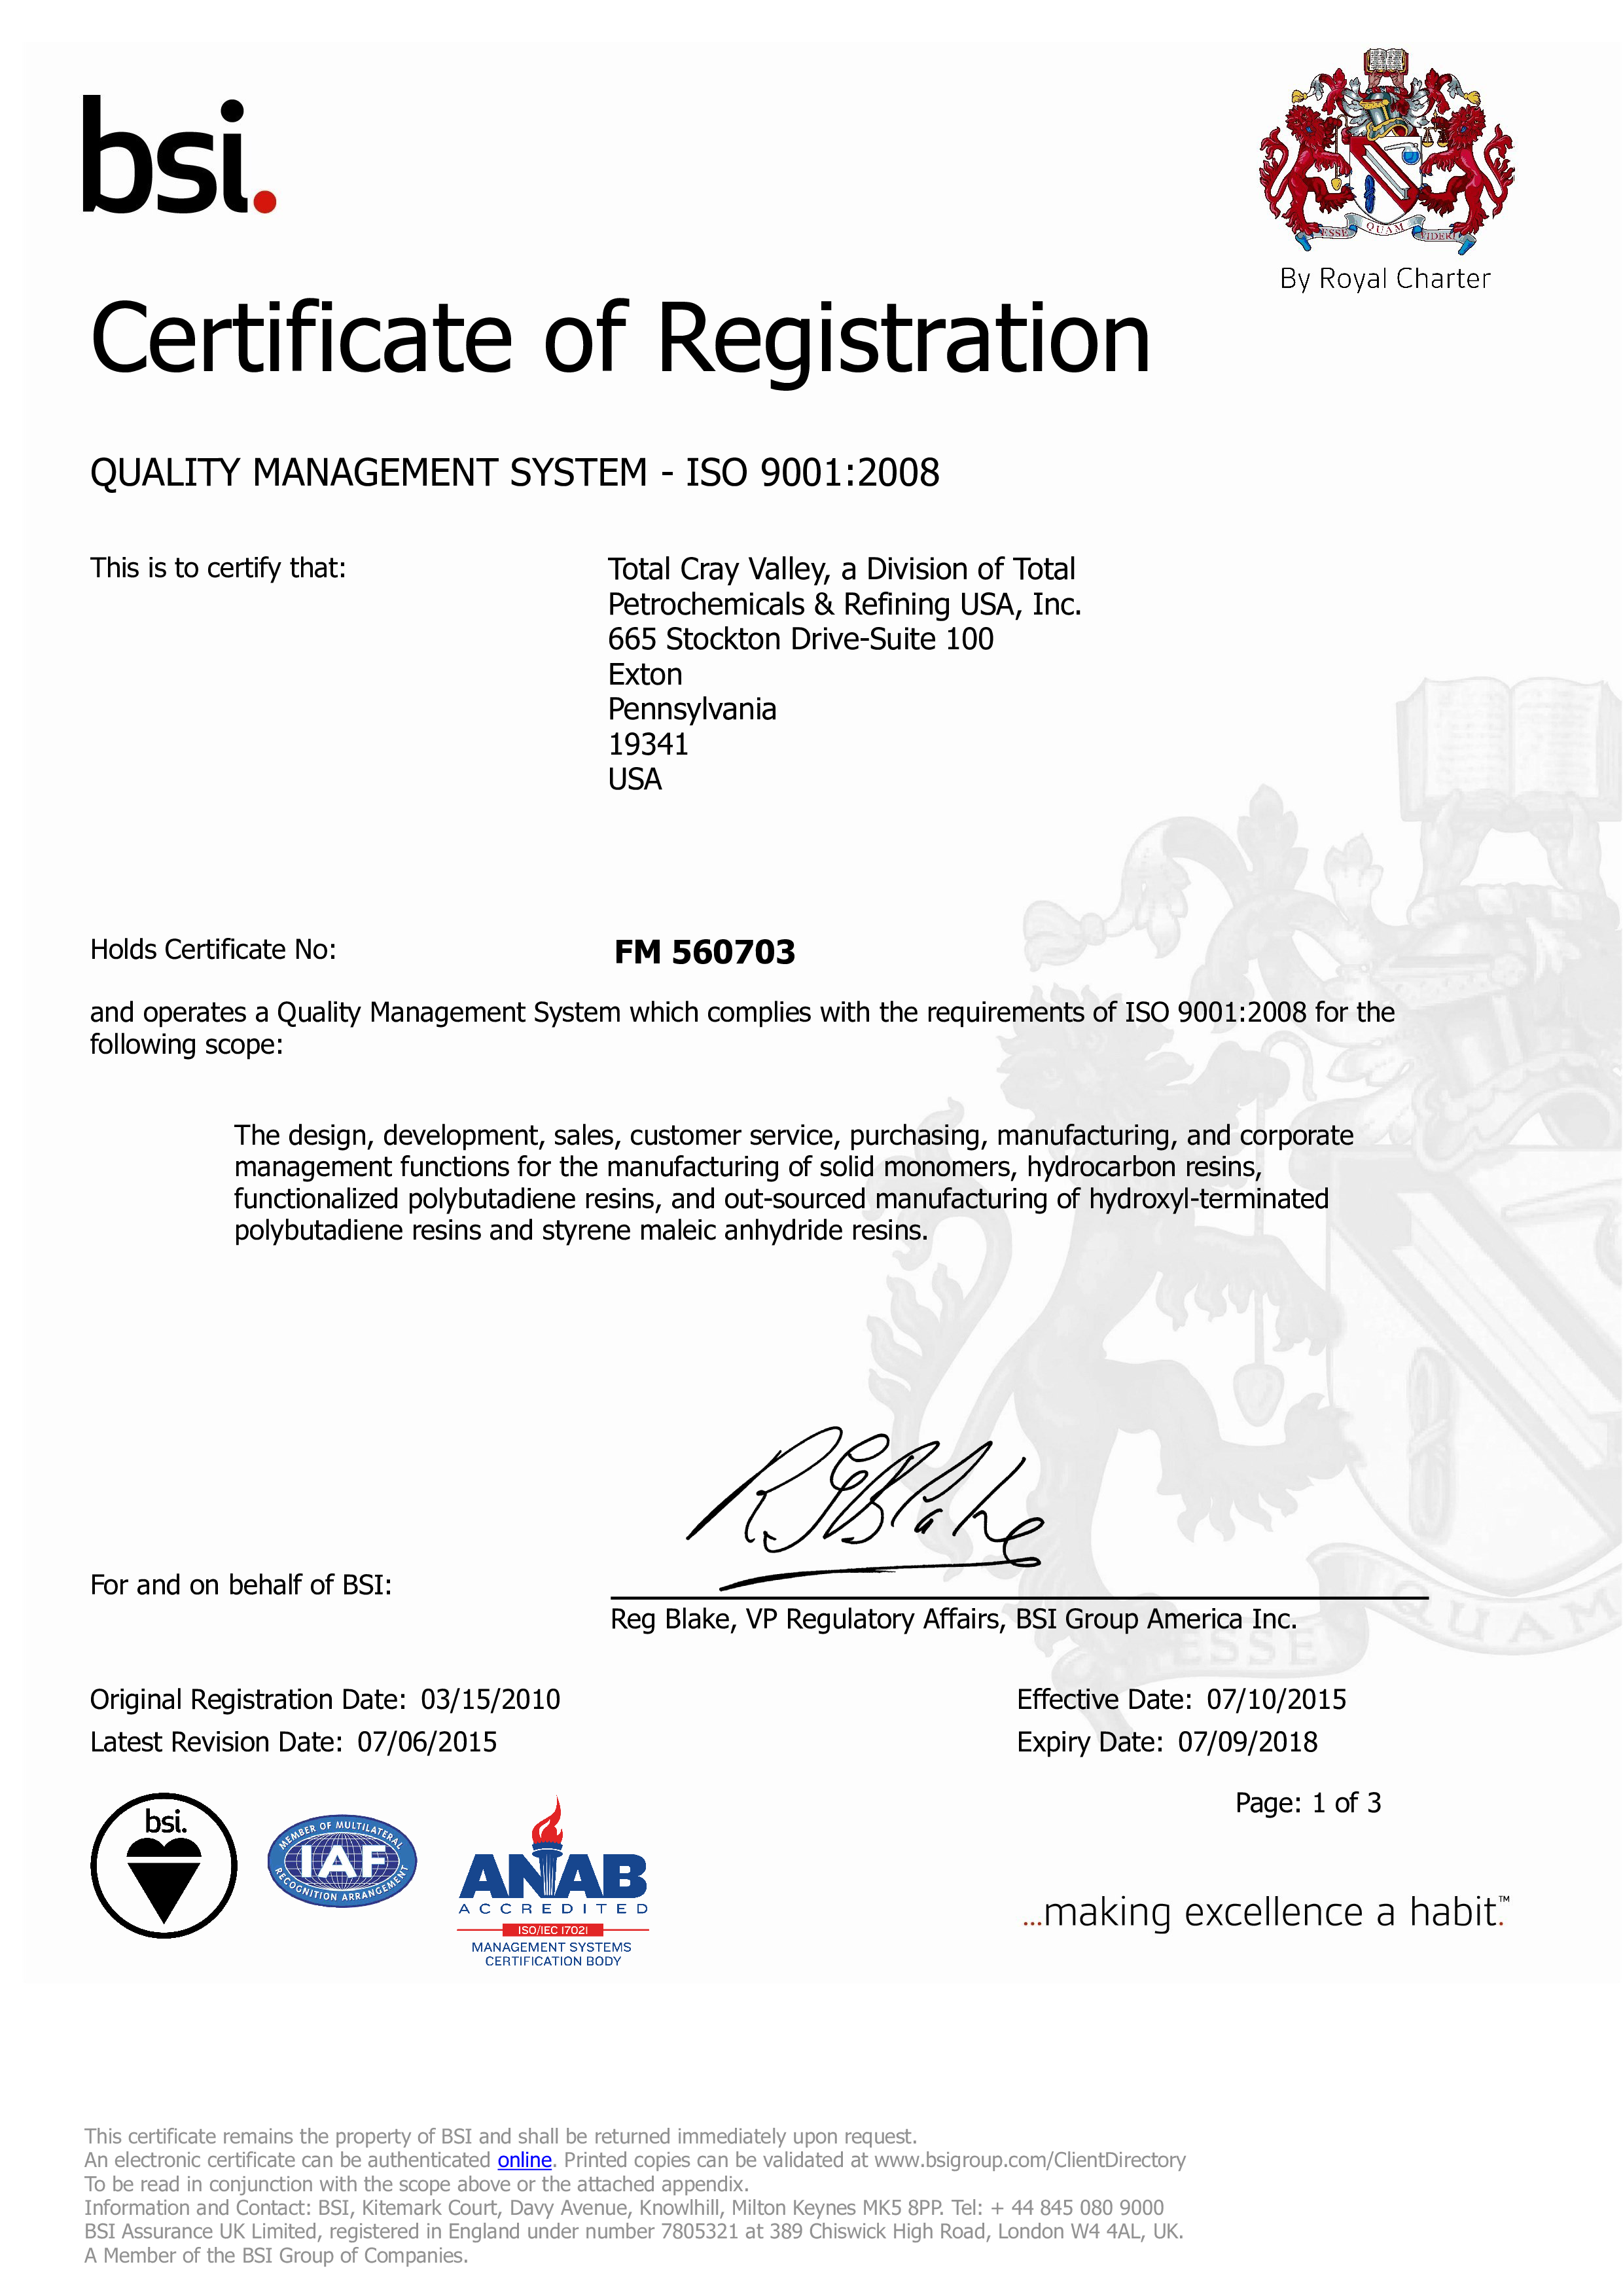 Total Quality Management Certificate main image